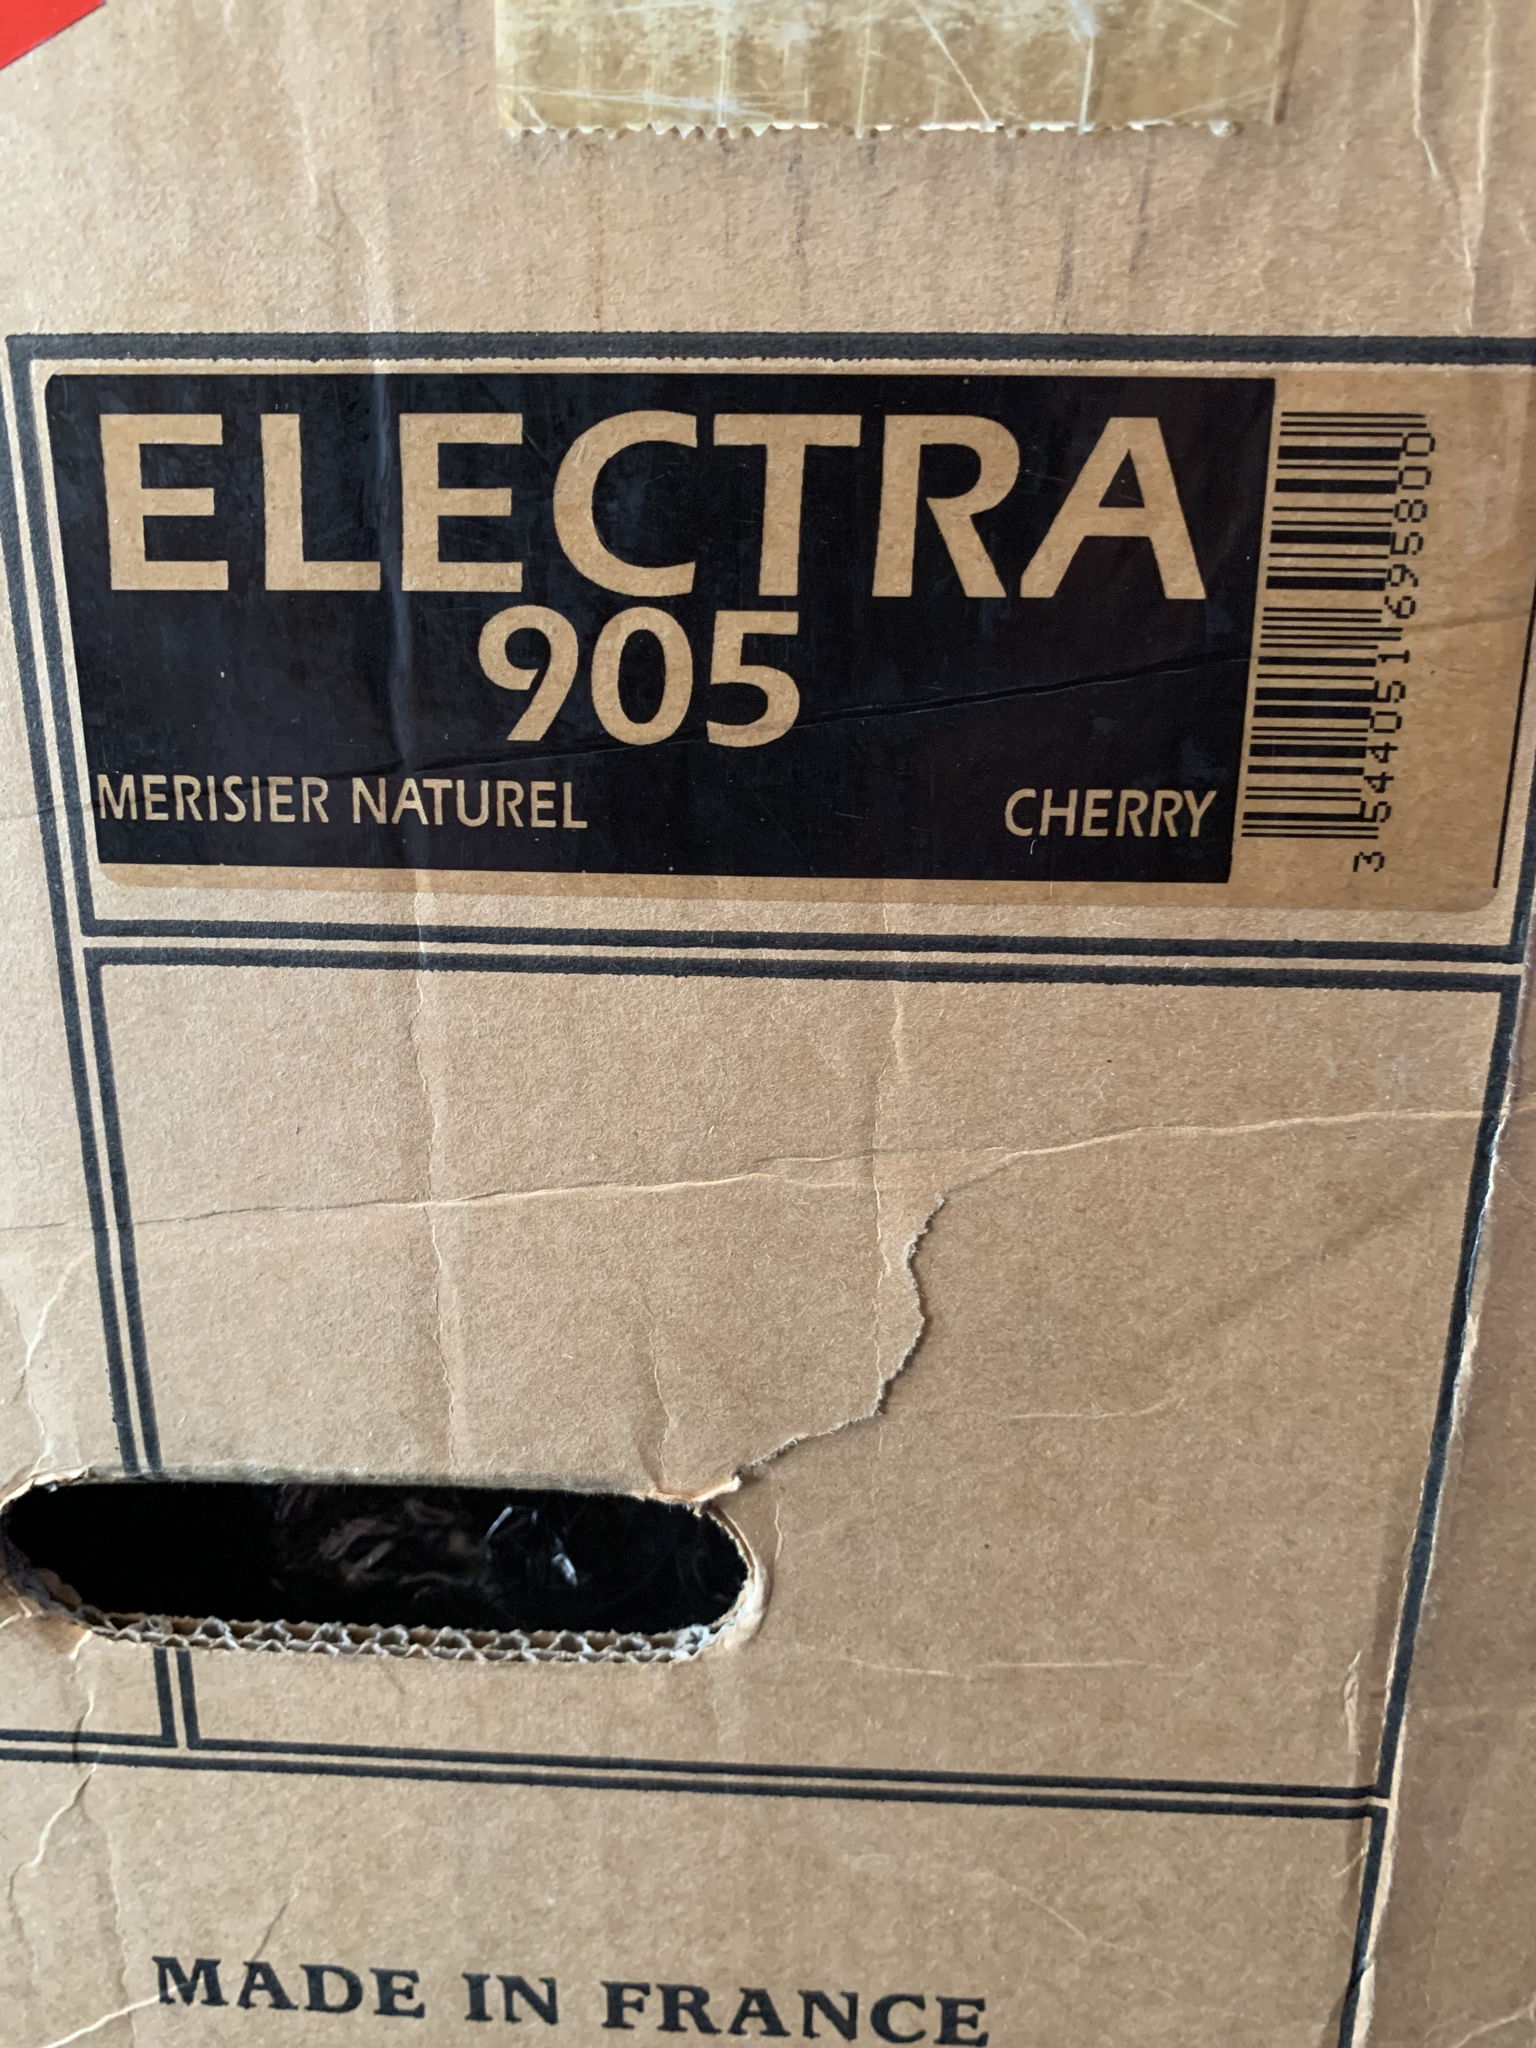 Focal Electra 905 “Like New” Retail Boxed 18